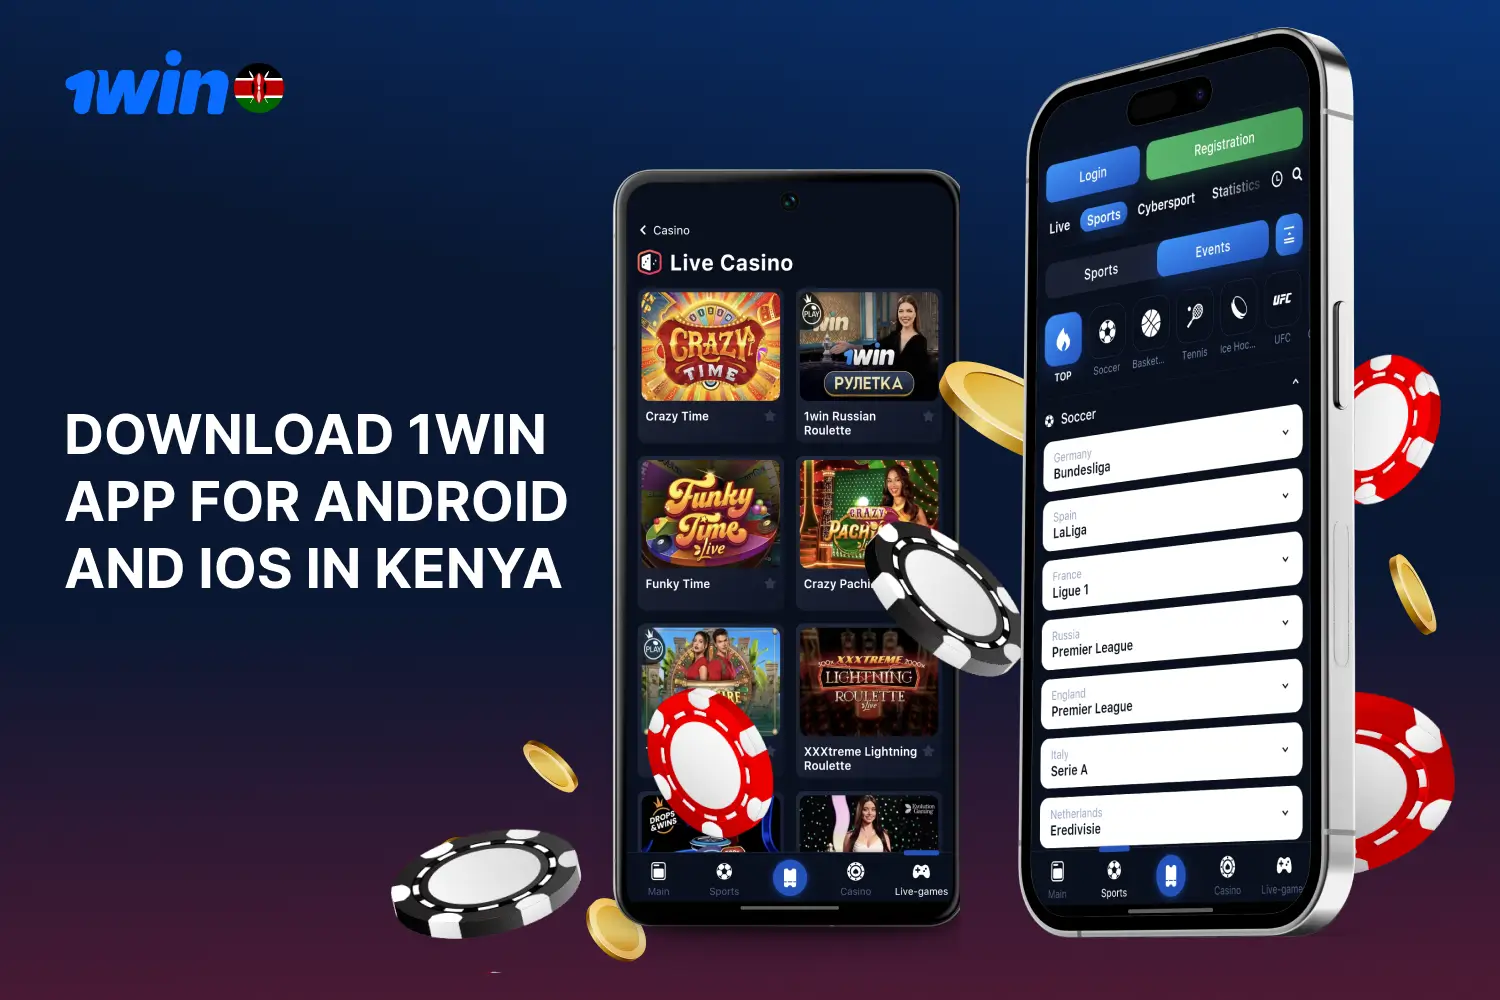 The 1win mobile app for android and ios gives Kenyan bettors quick and easy access to sports betting